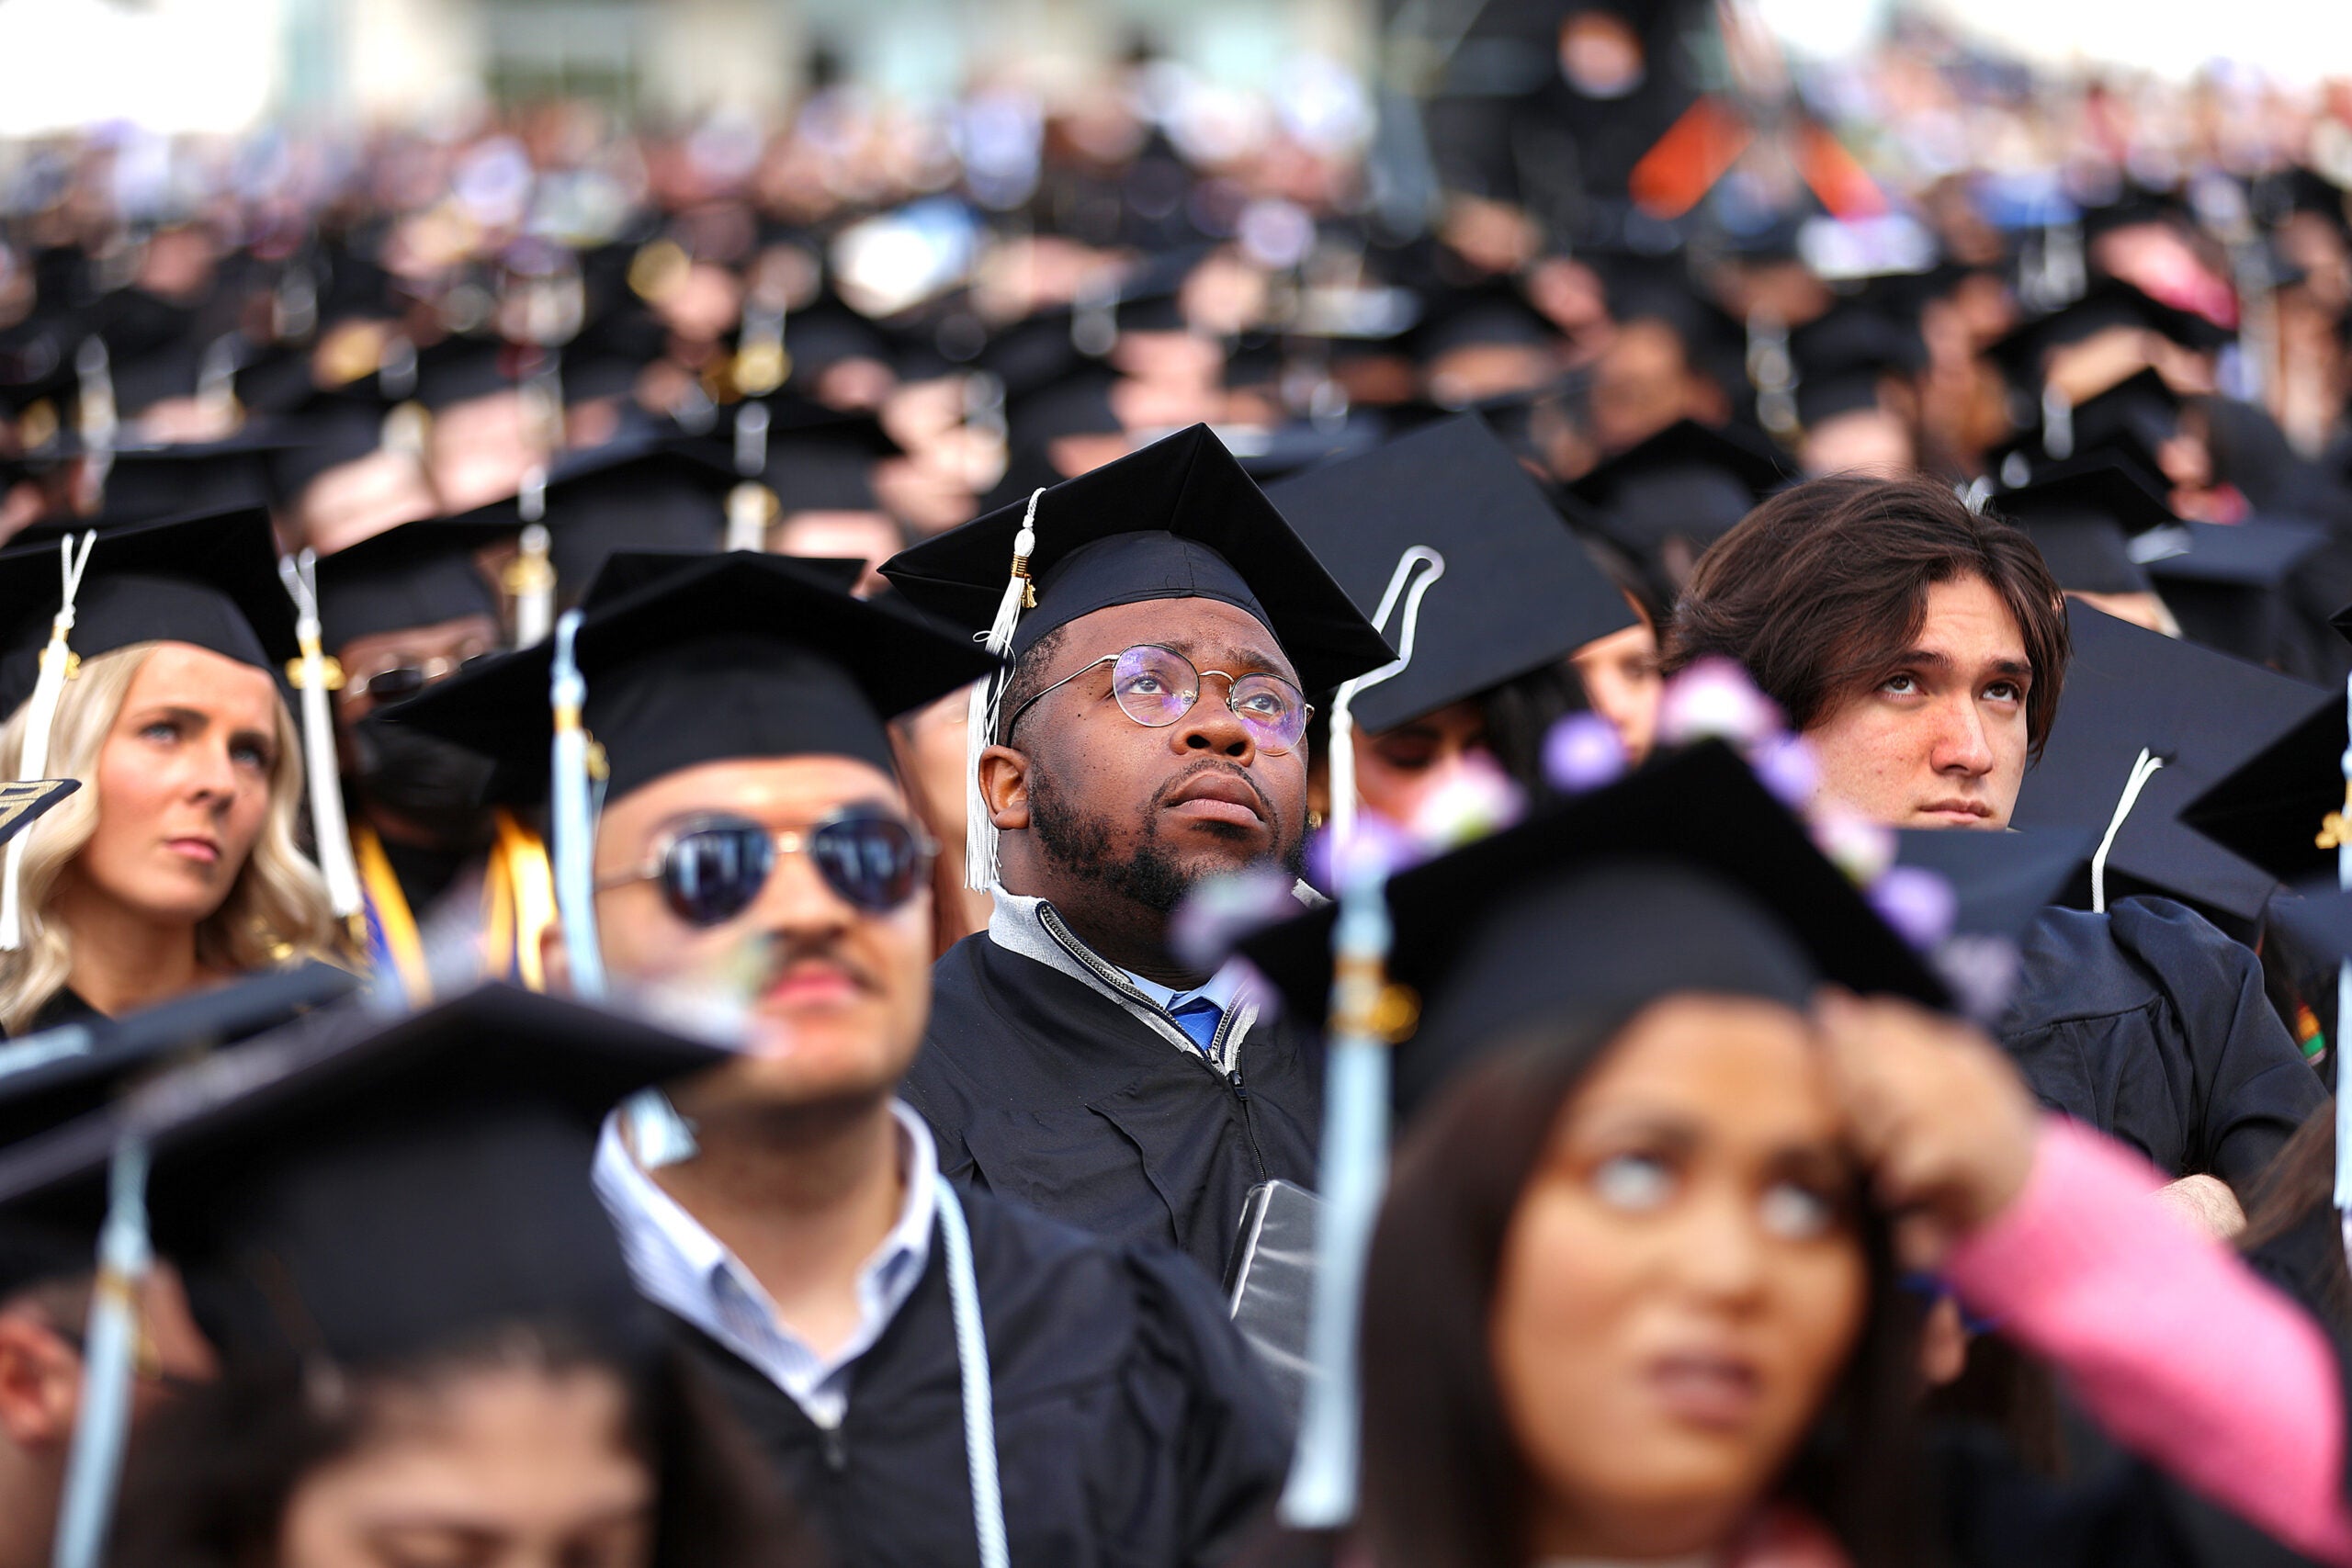 A group of graduates wearing caps and gowns